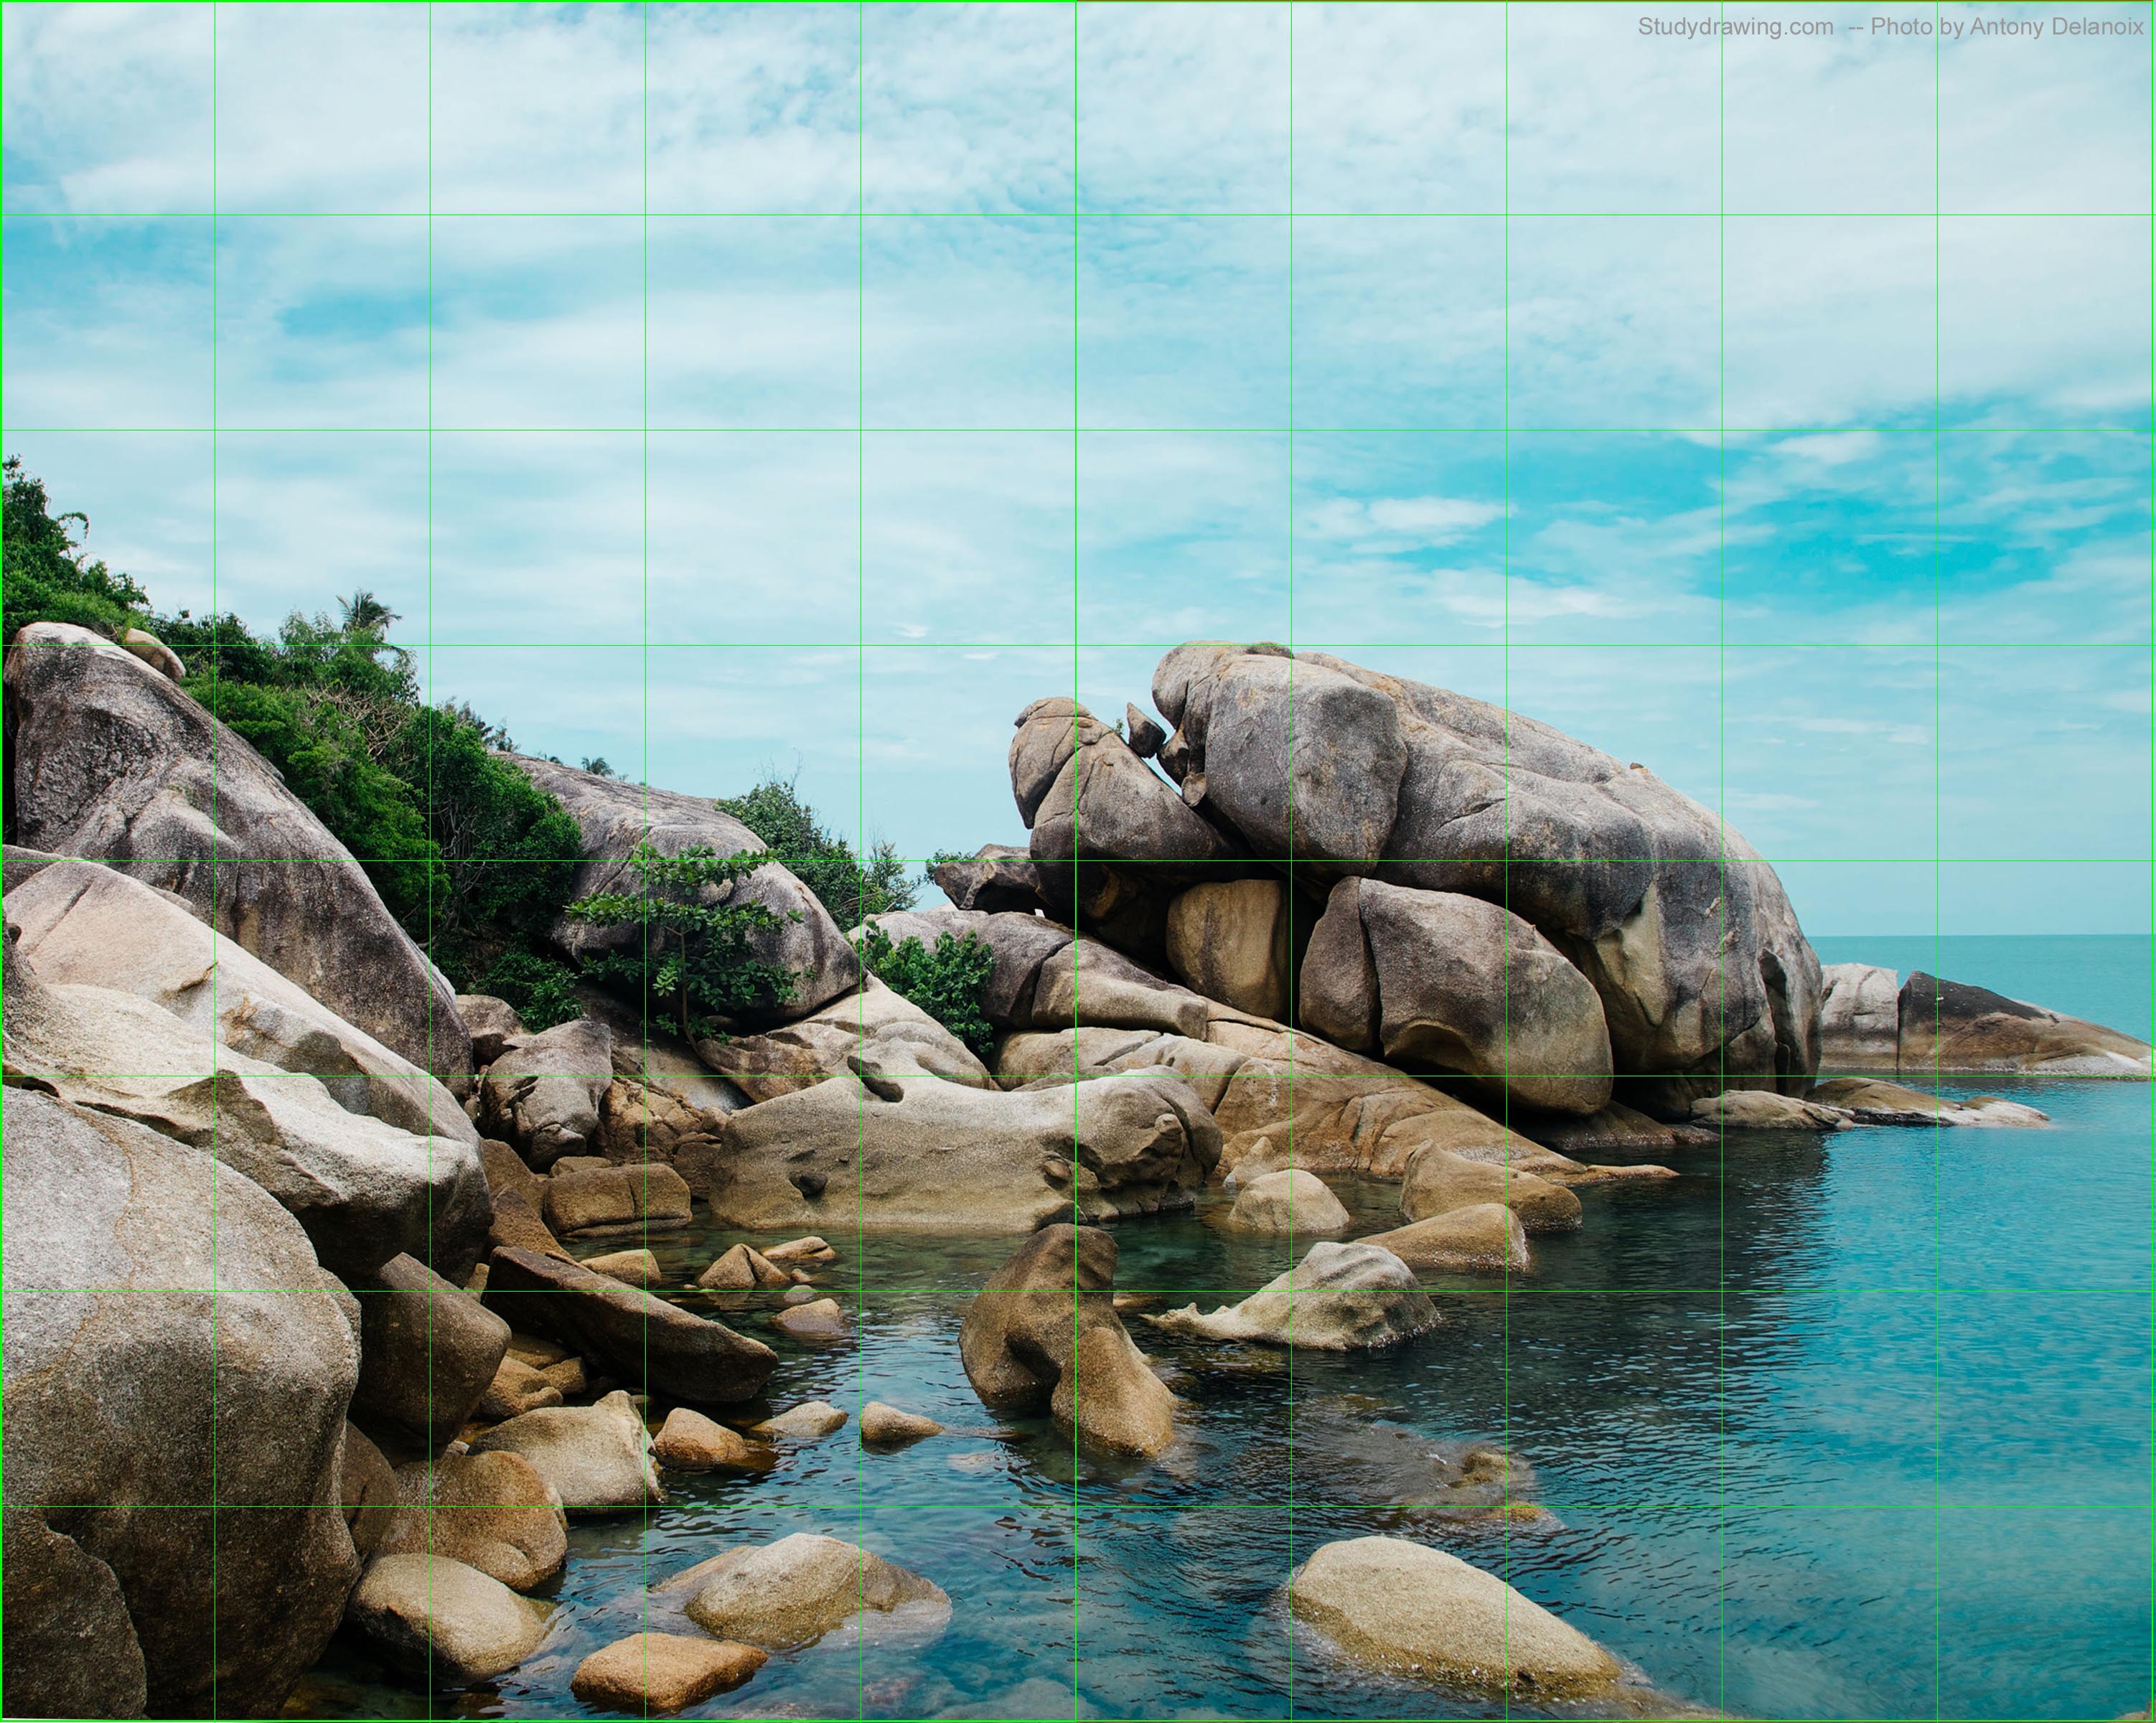 A picture of a rocky oceanside with a grid overlaid.